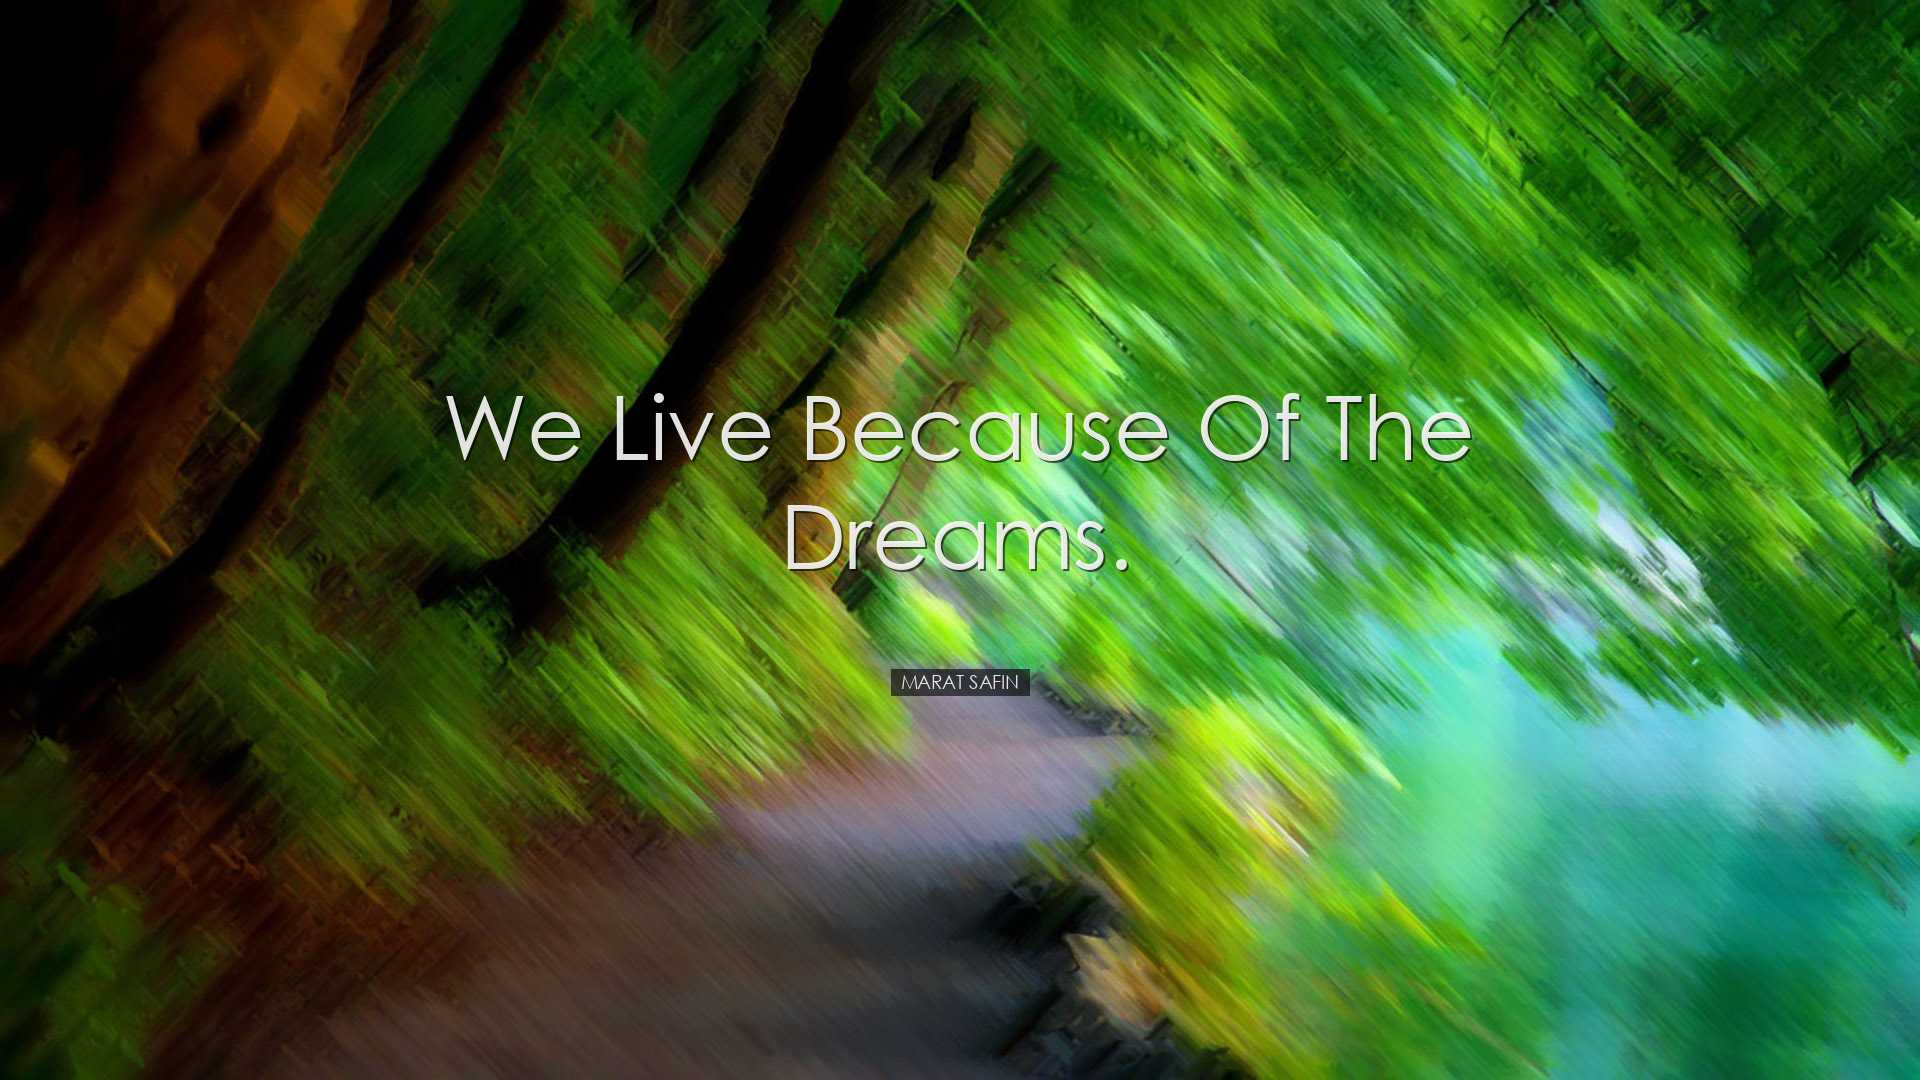 We live because of the dreams. - Marat Safin